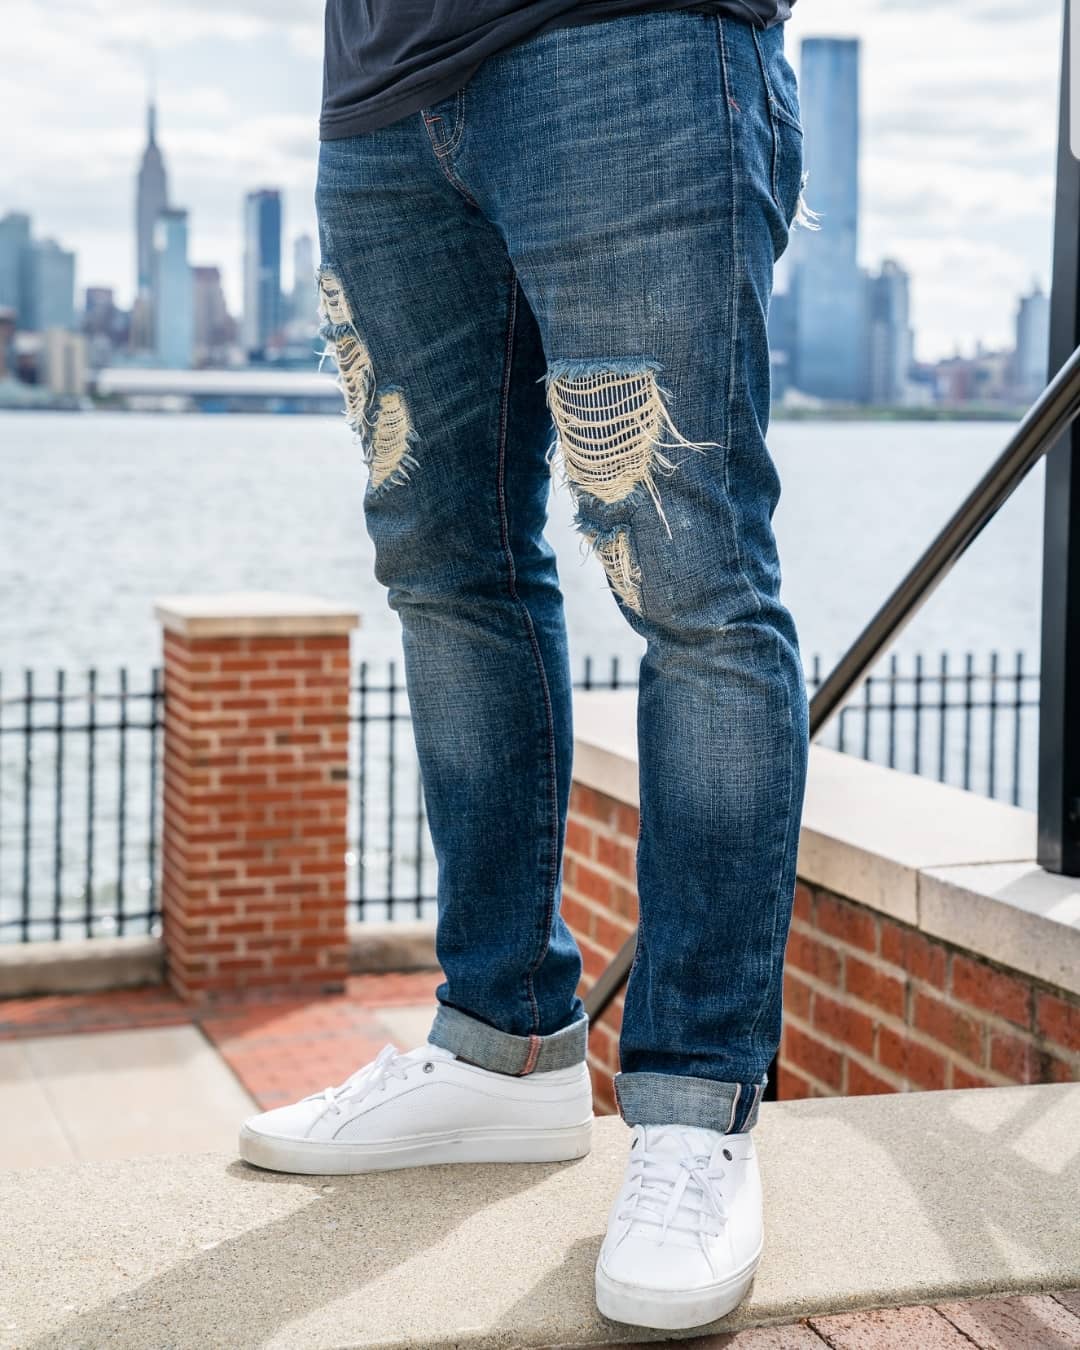 Find Your Denim Personality